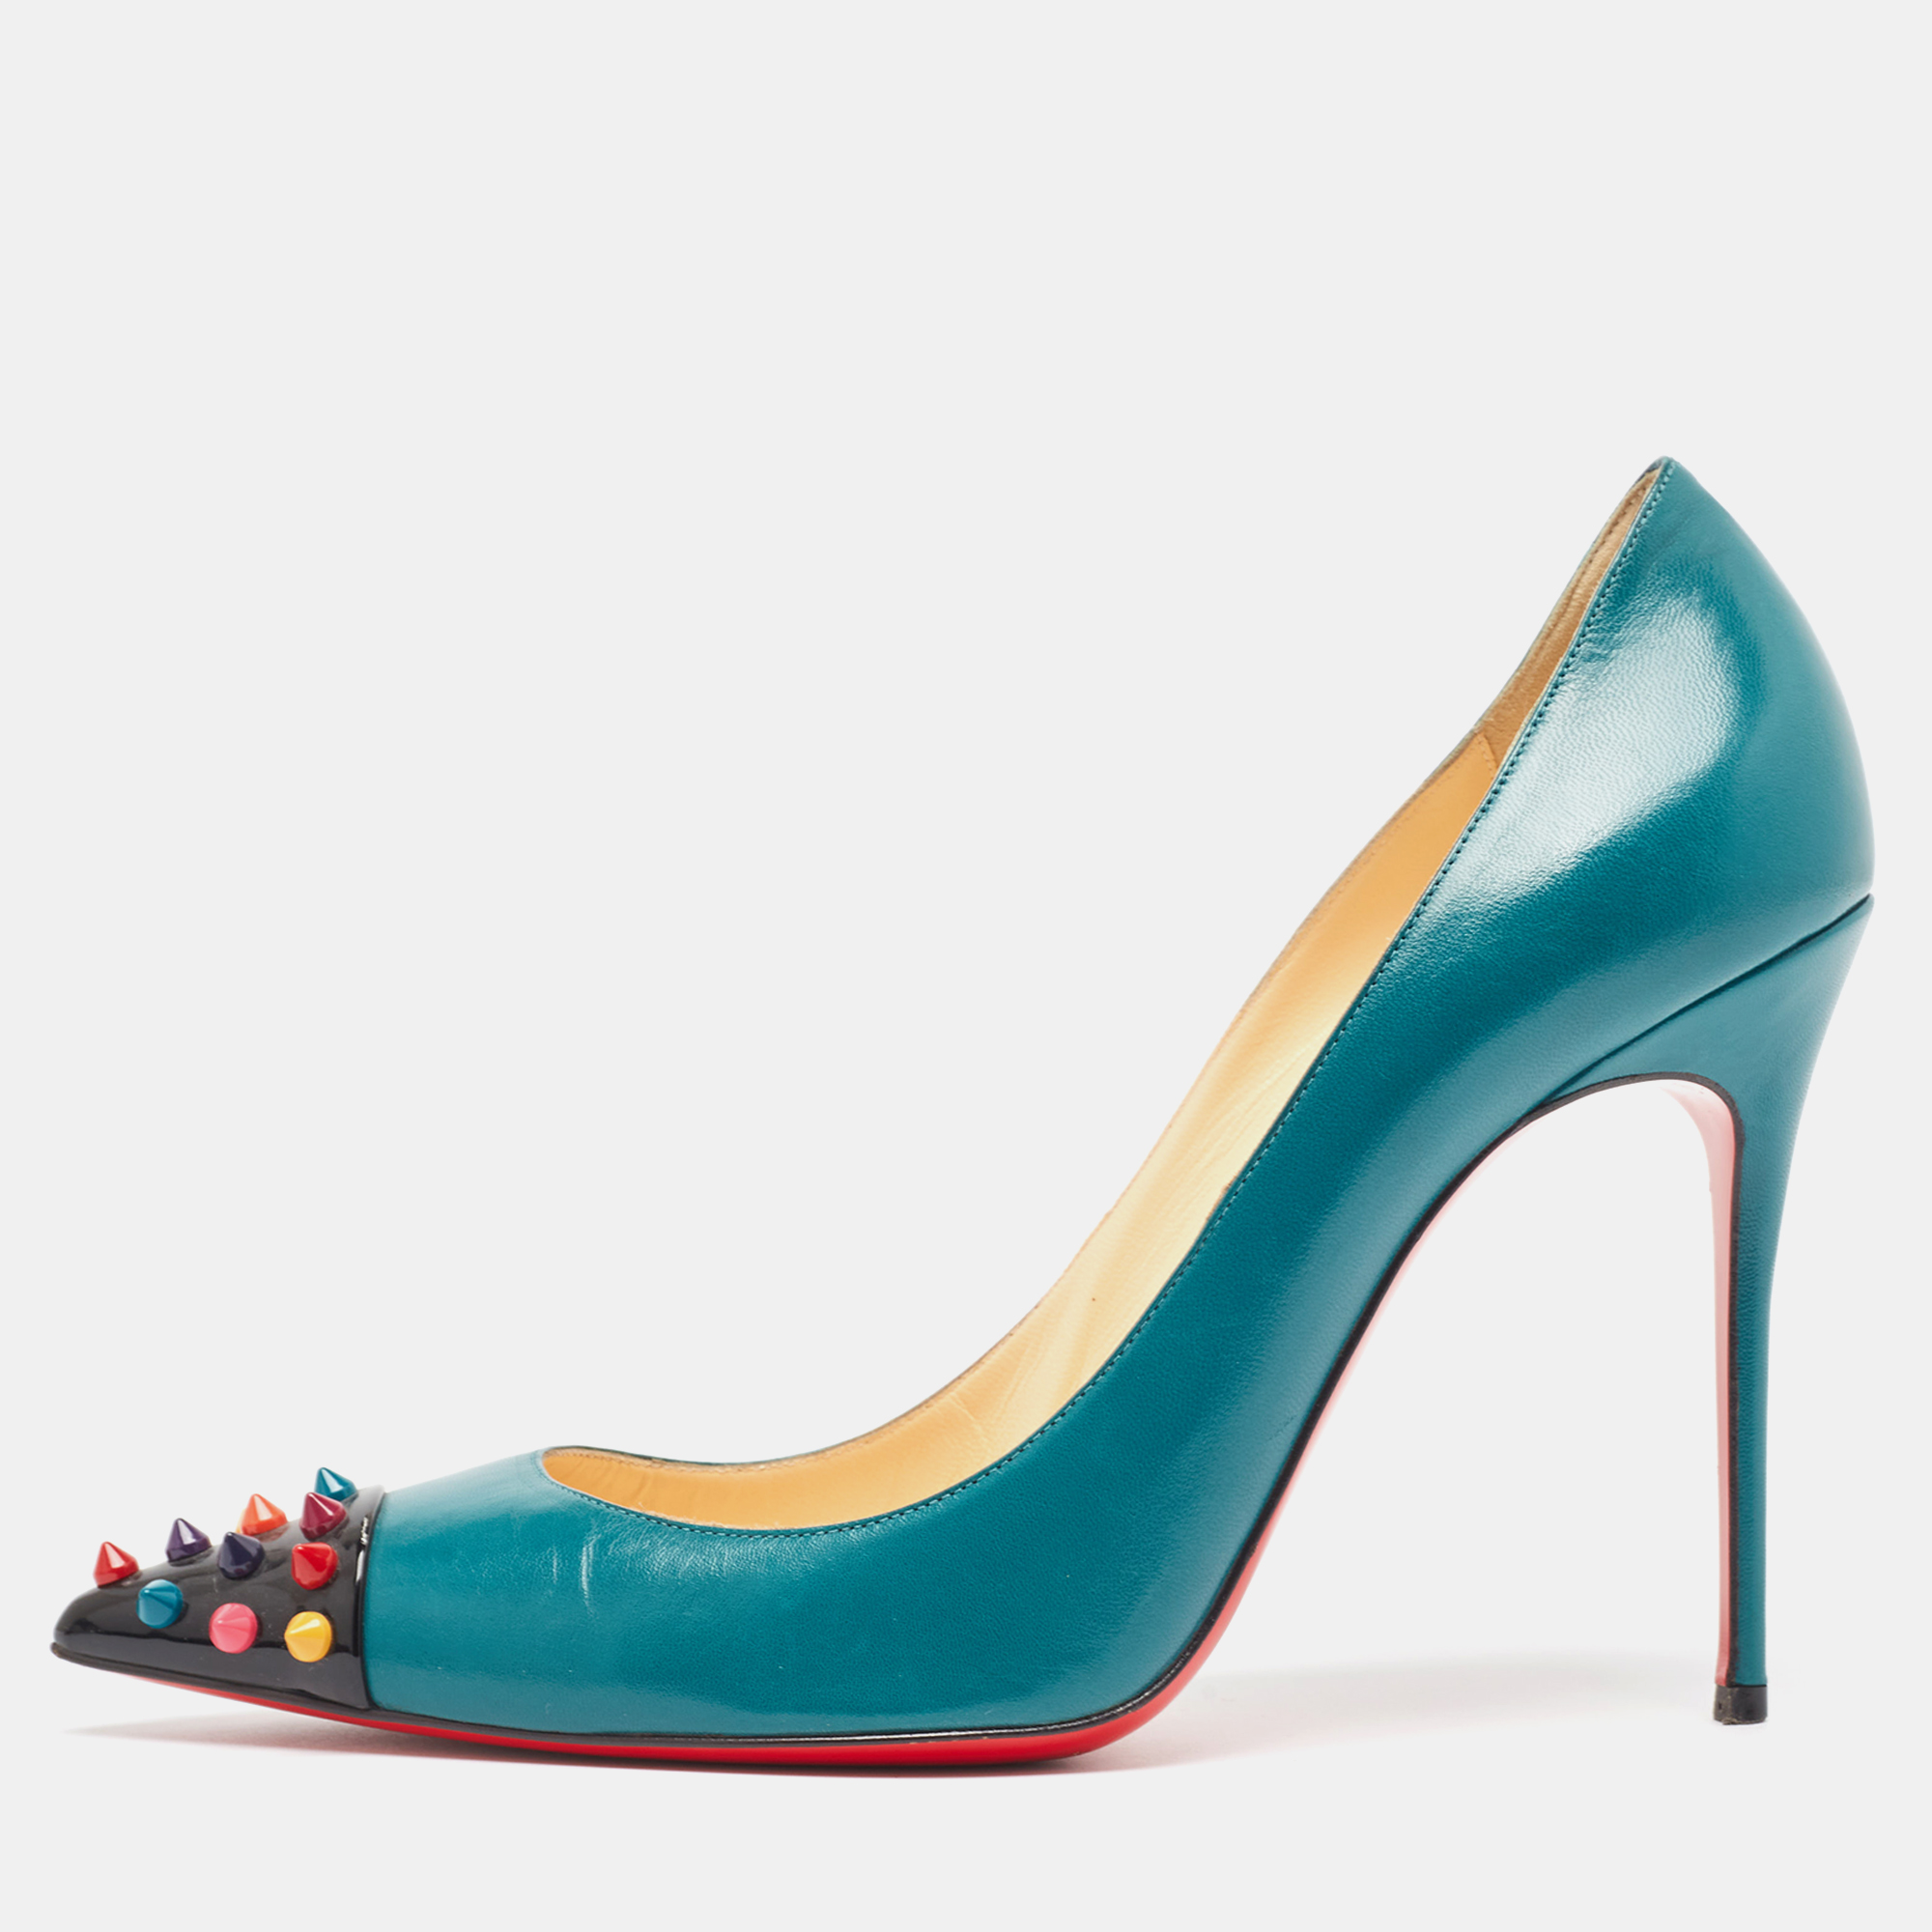 Christian louboutin green leather geo pumps size 41